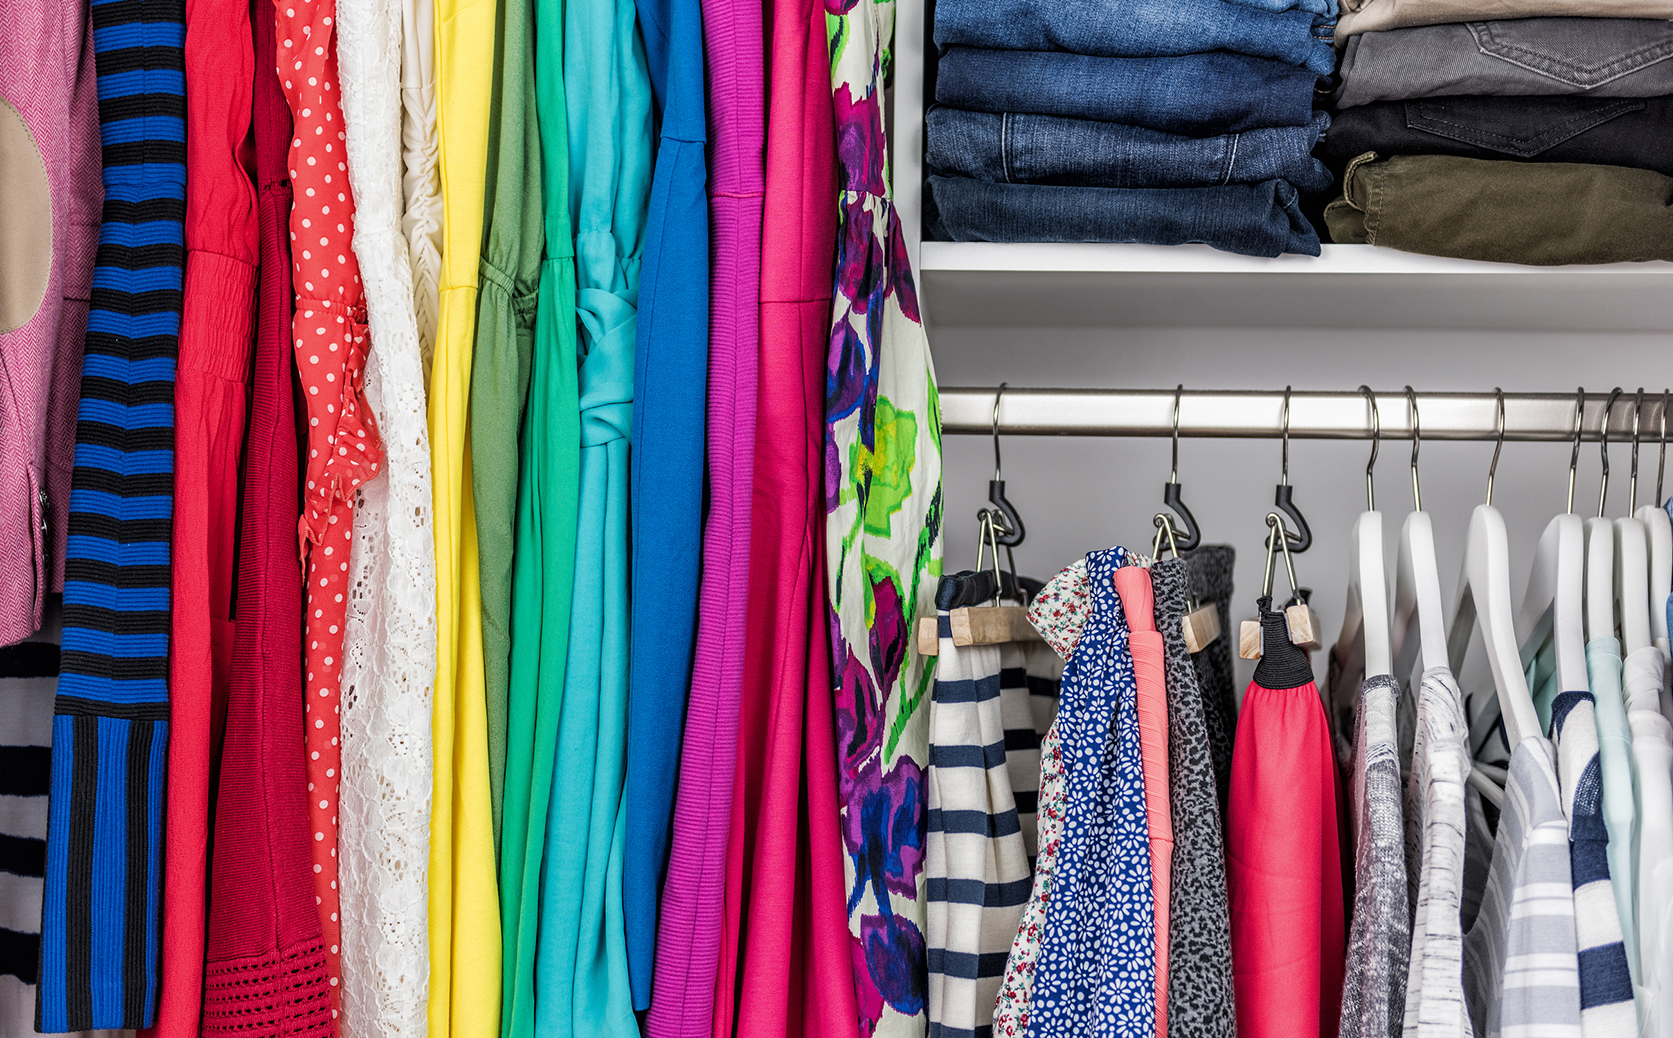 Colorful clothing organized in a closet.